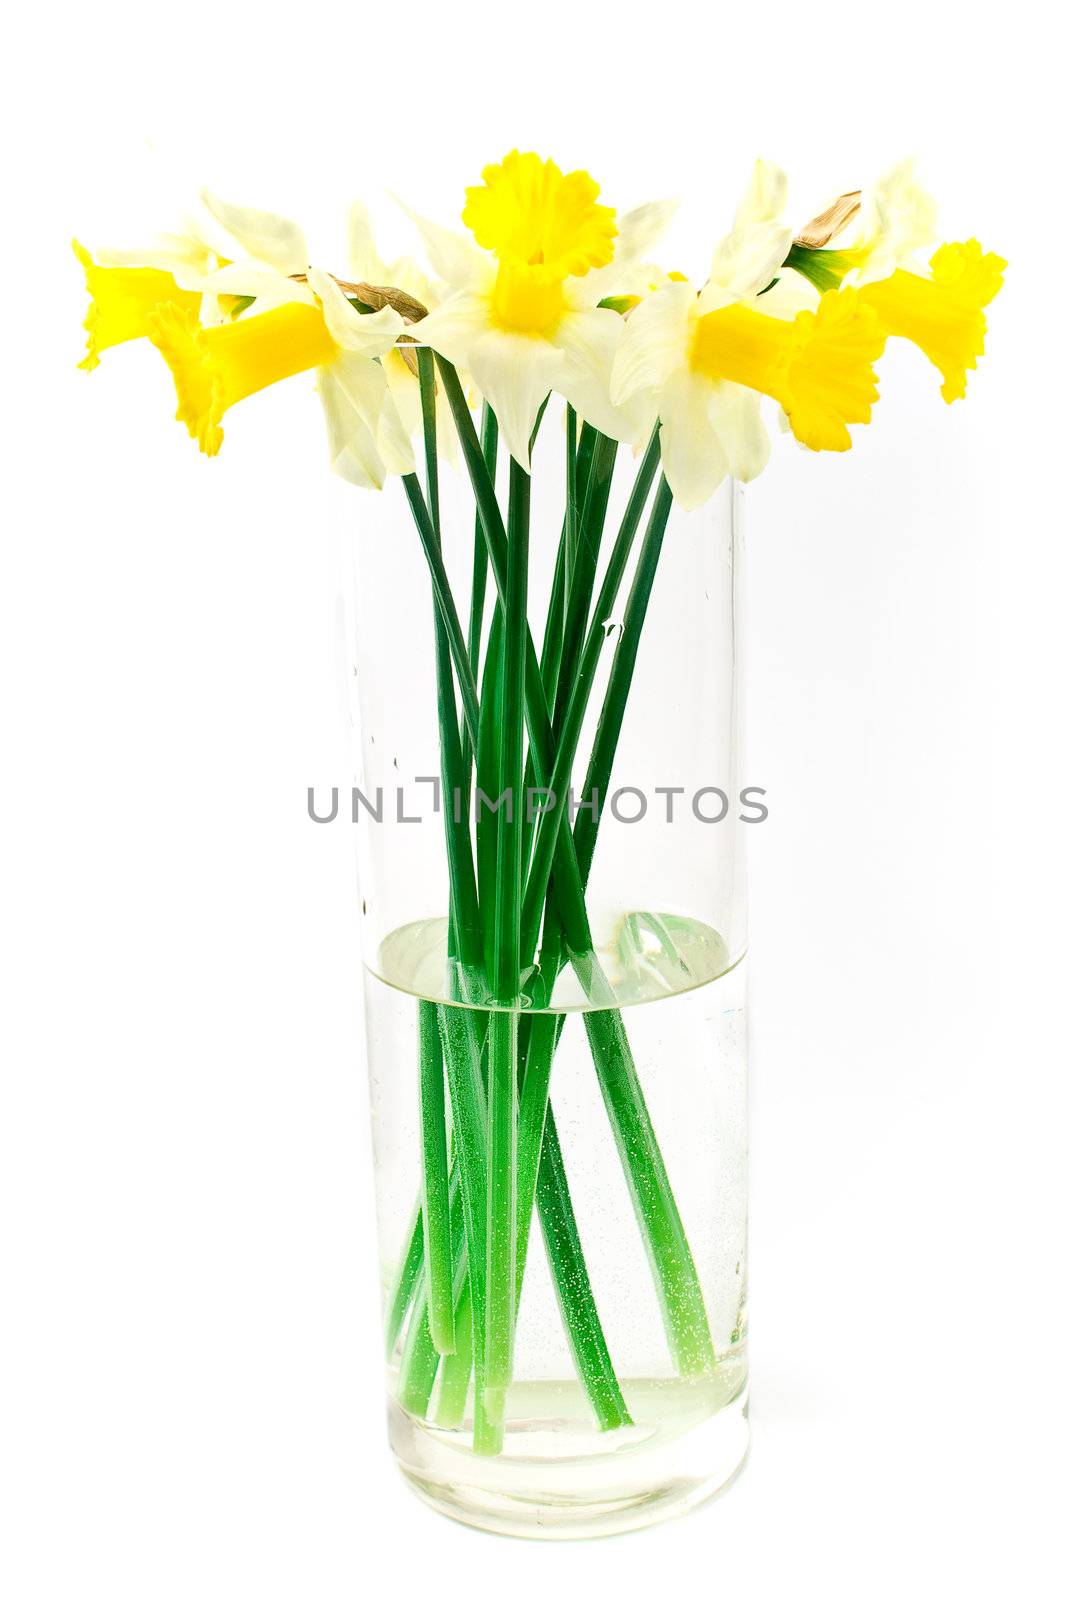 Yellow daffodils narcissus in big glass vase isolated on white